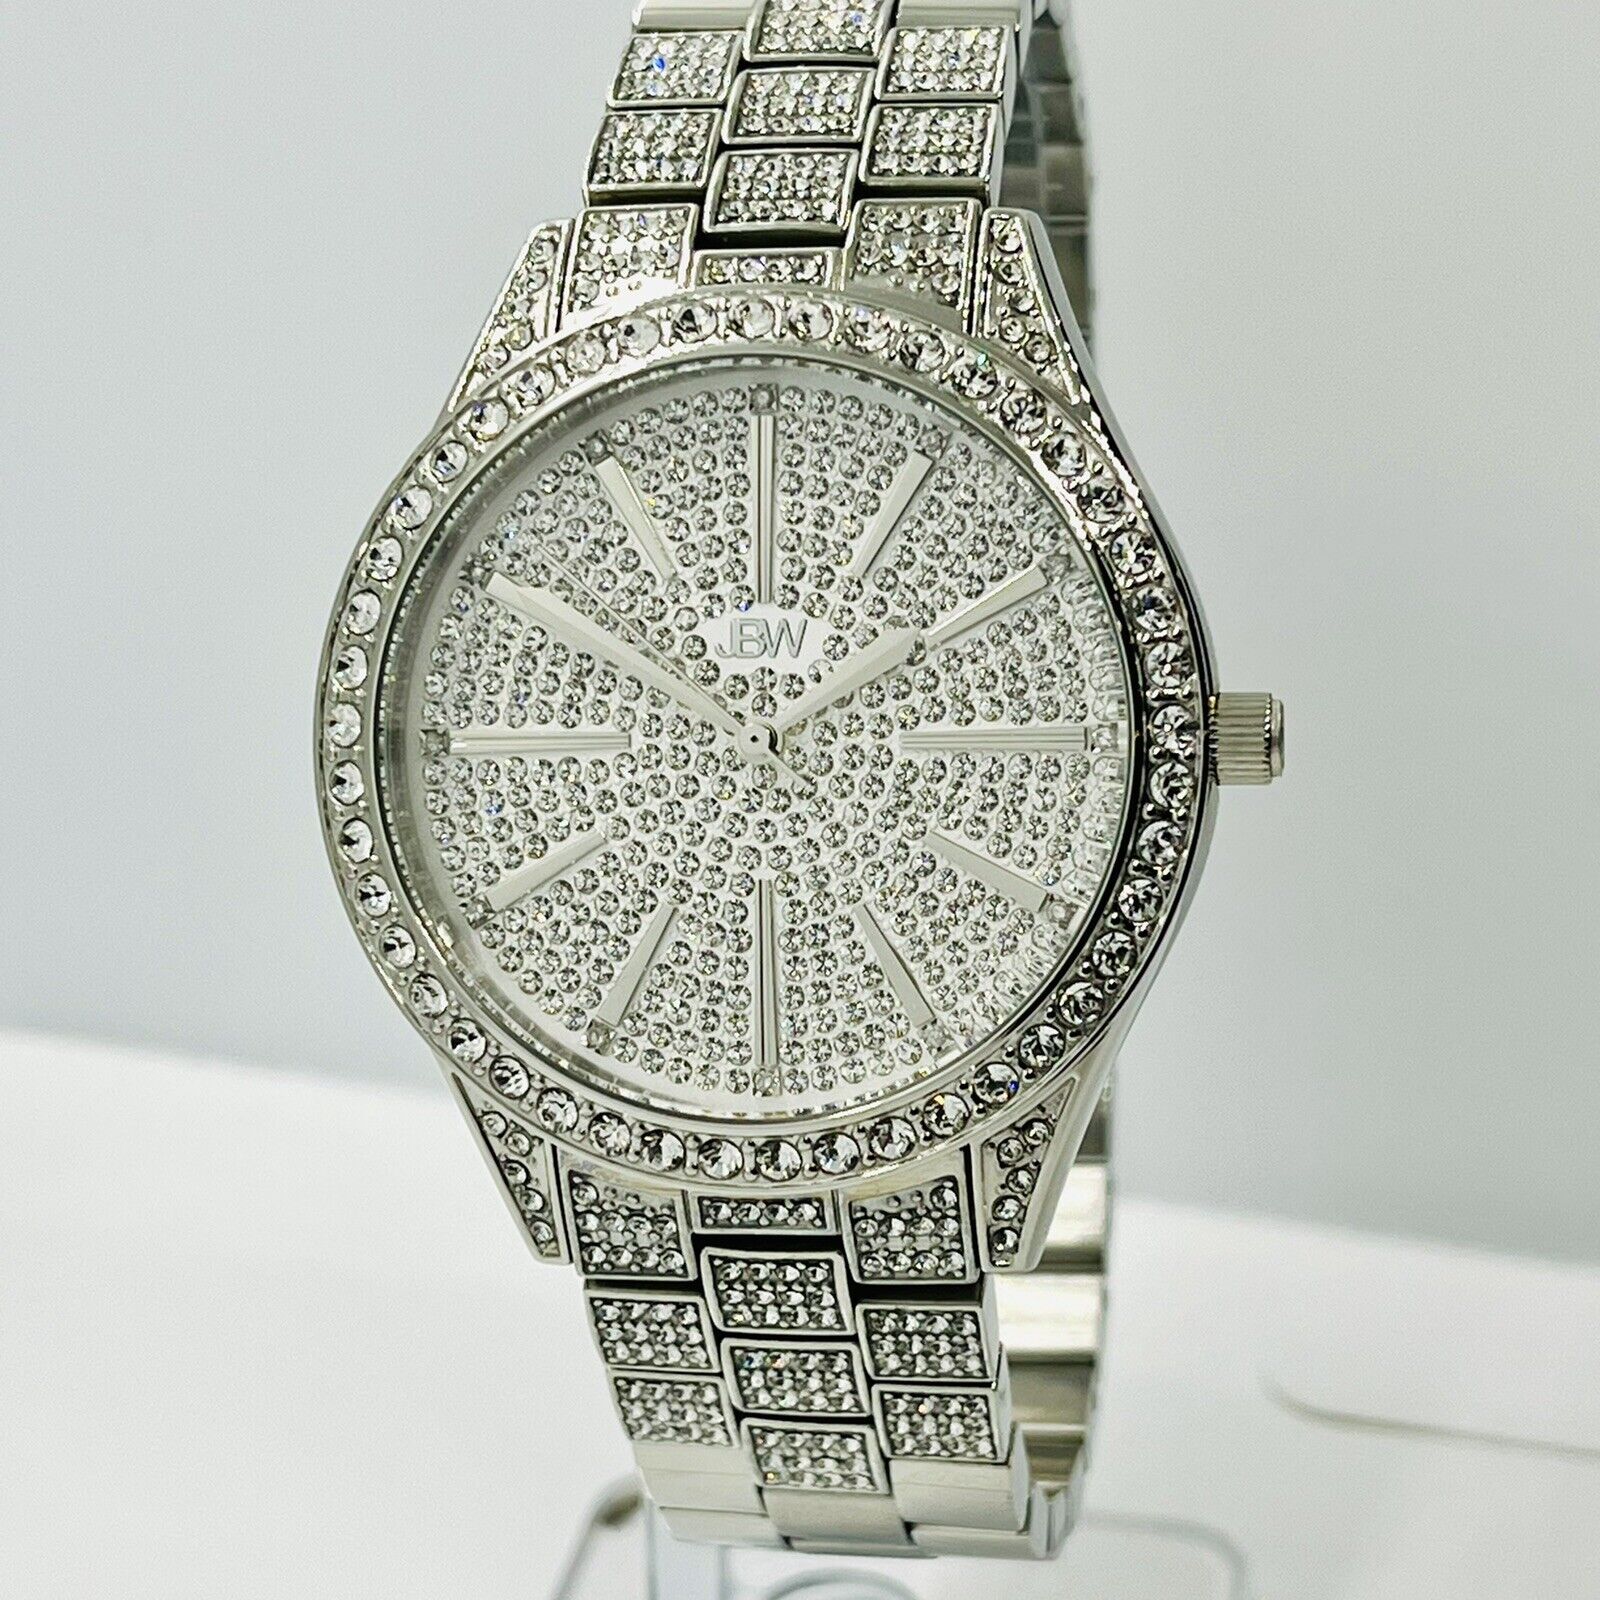 JBW J6346C Cristal 1/8 CT. T.W. Diamond and Crystal Accent Women's 39mm Watch